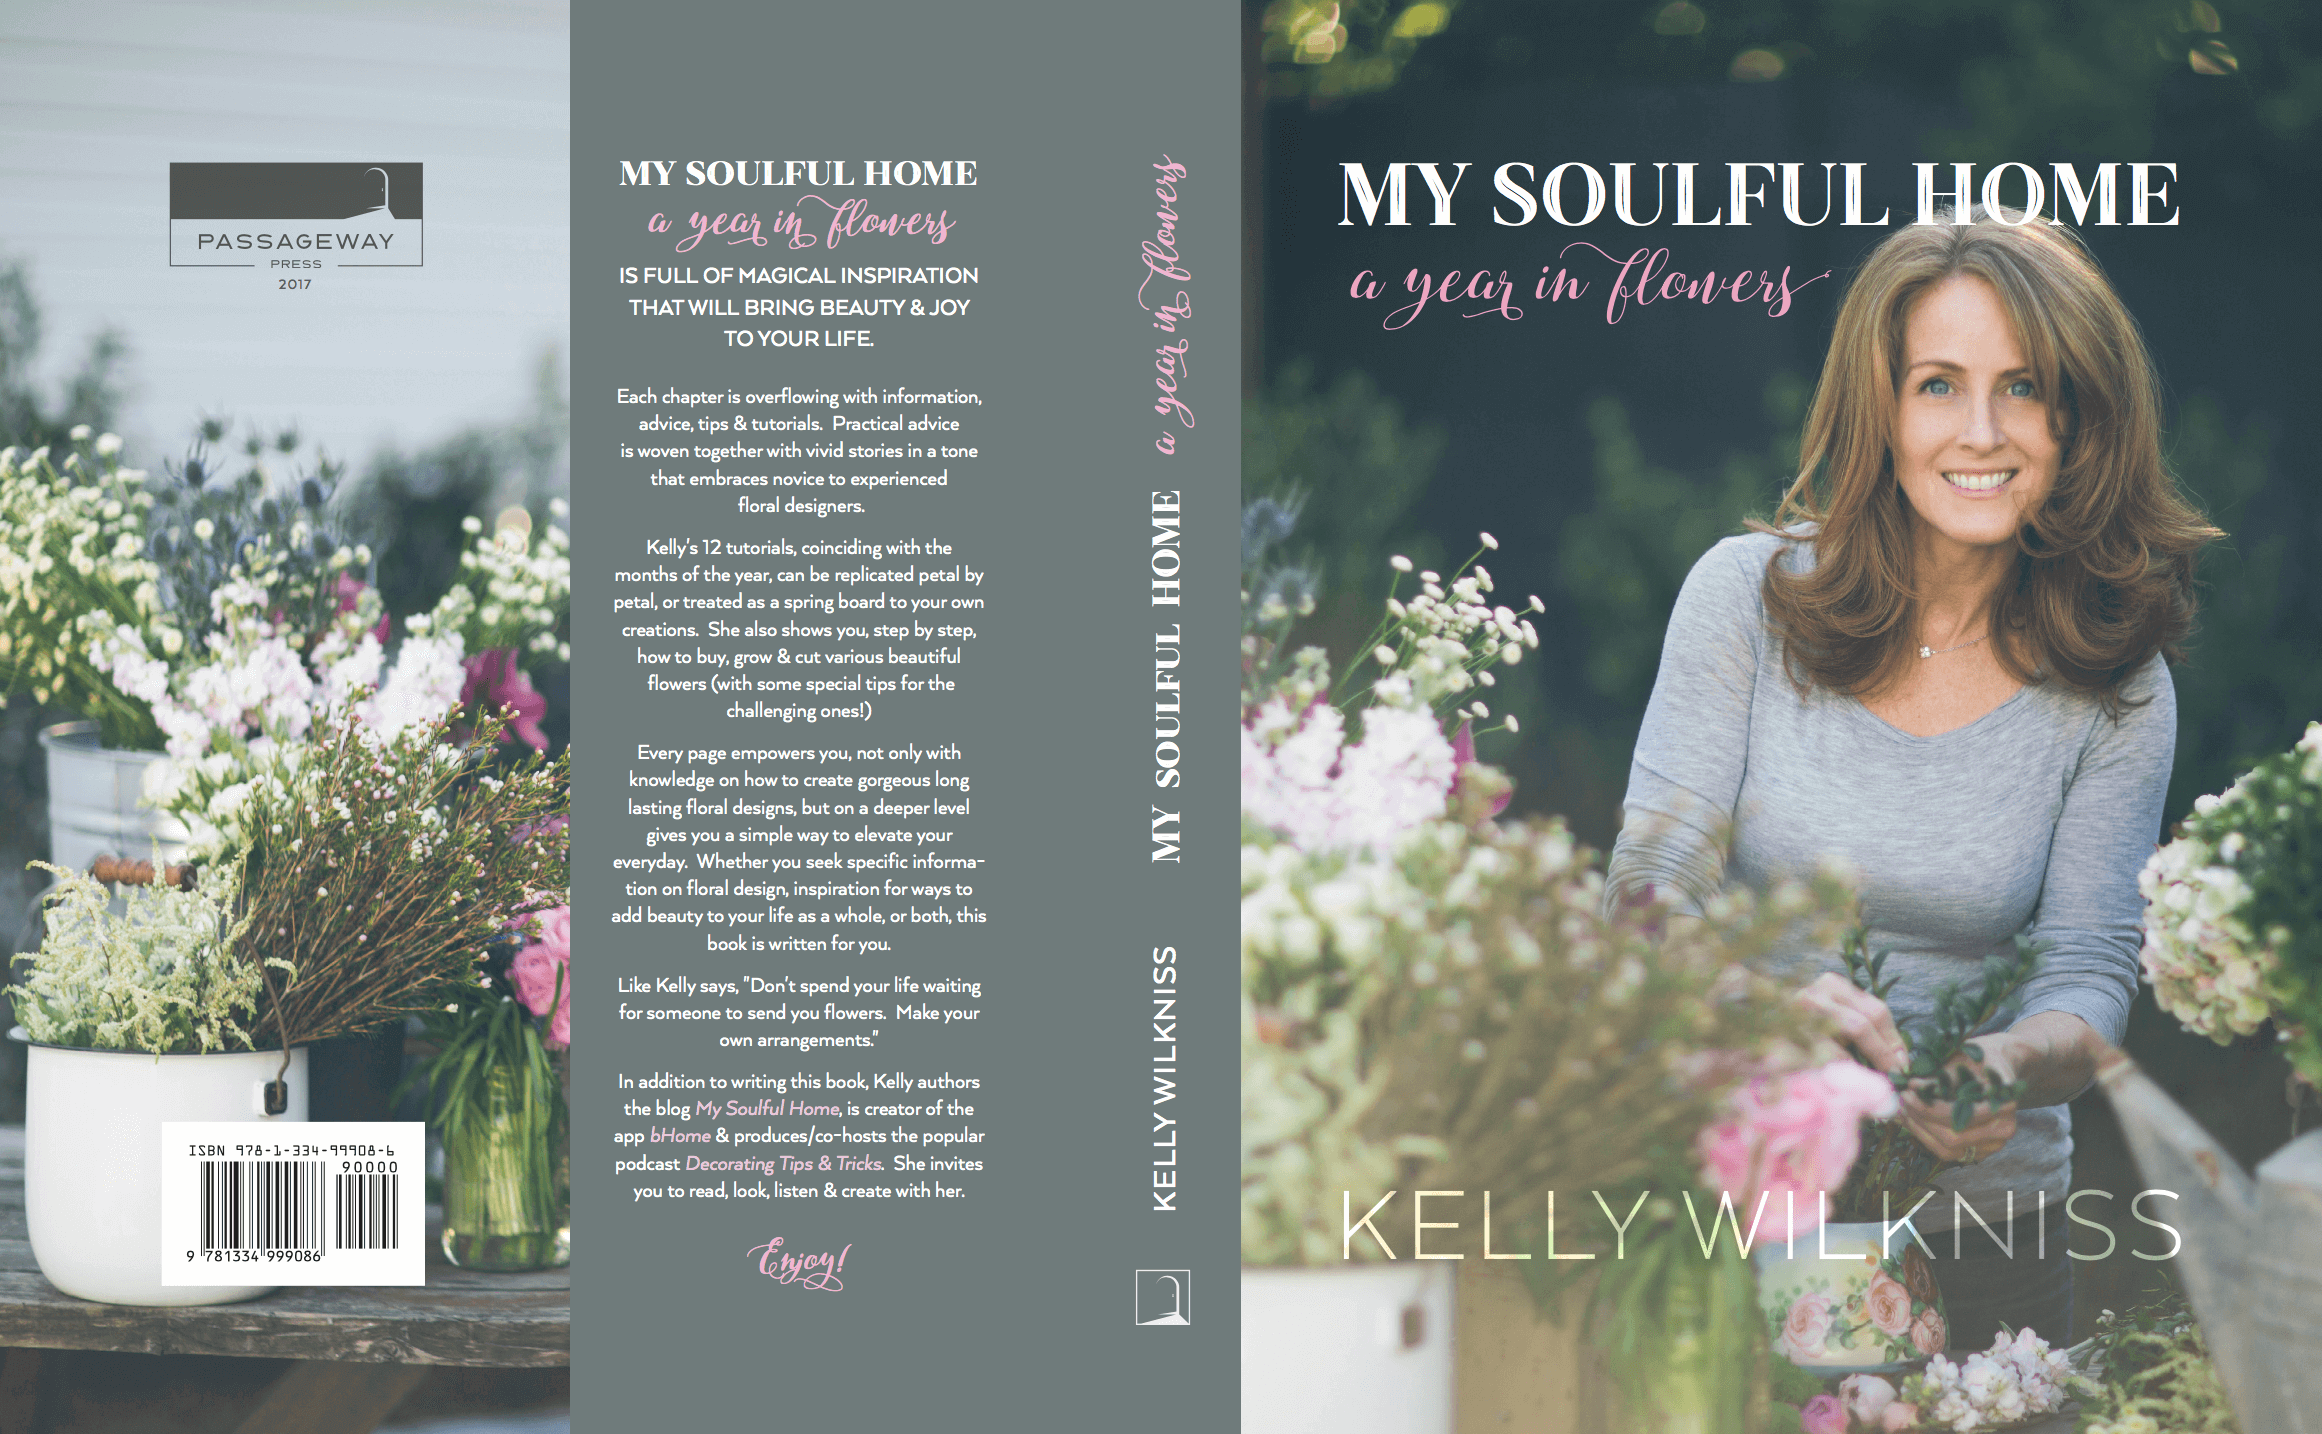 My Soulful Home a year in flowers book http://mysoulfulhome.com